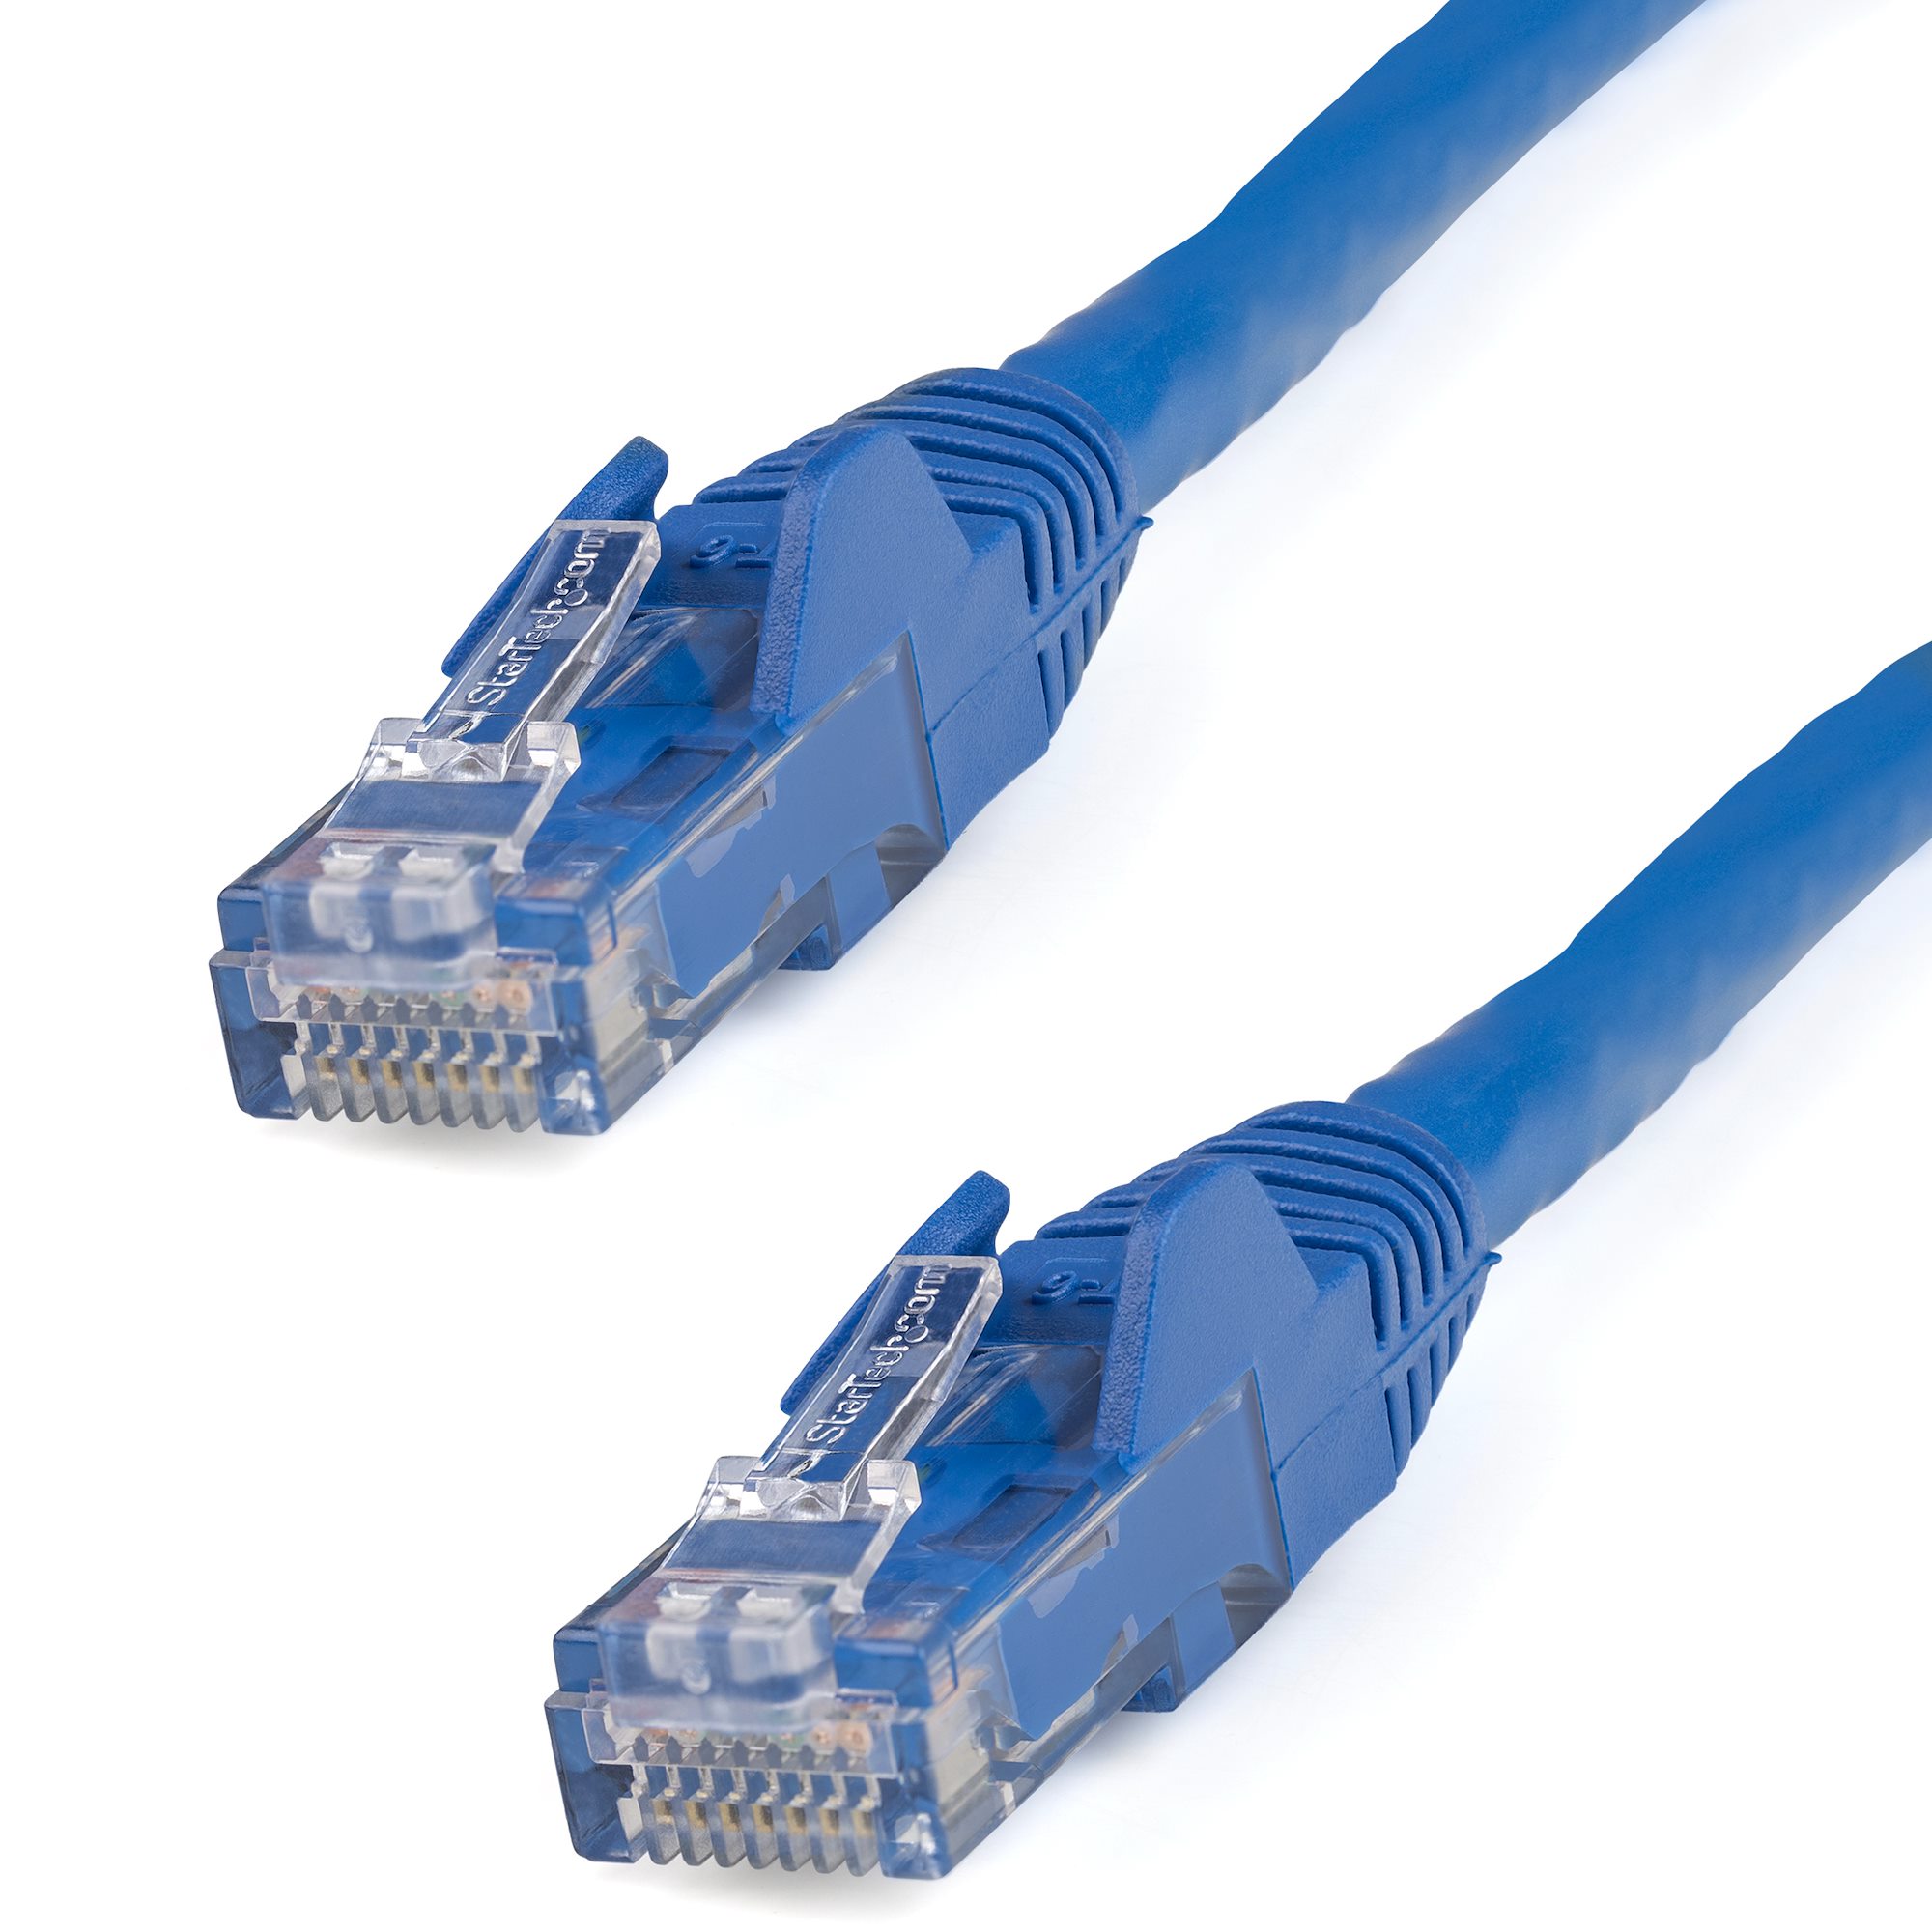 5m Brown Ethernet Cable Cat5e RJ45 Home Office Network Patch Lead 100% Copper 